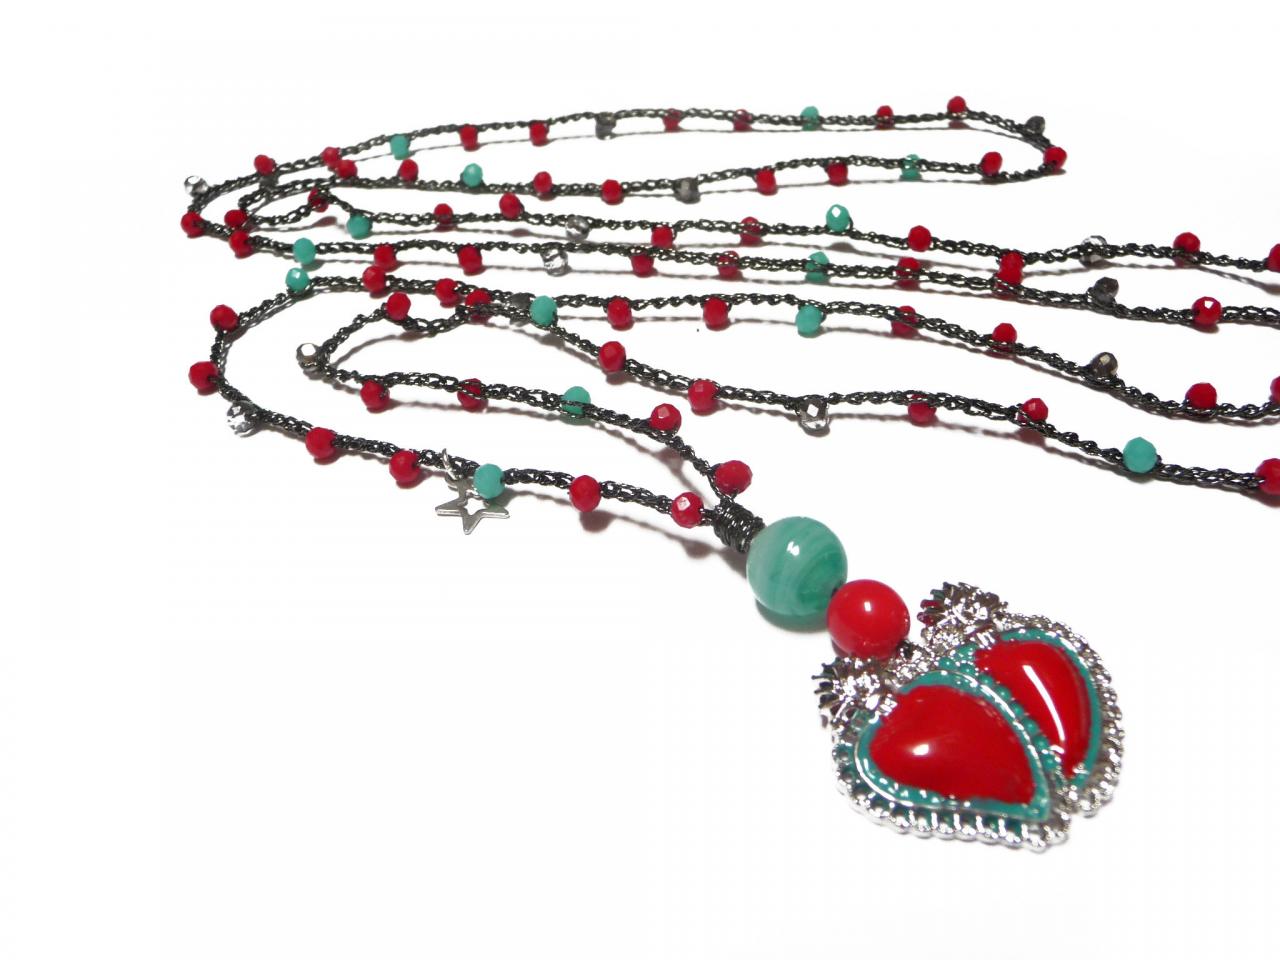 Sacred Heart Necklace With Aqua Green And Red Tiny Crystals, Milagro Heart Pendant, Long Beaded Boho Chic Crochet Necklace, Mexican Style